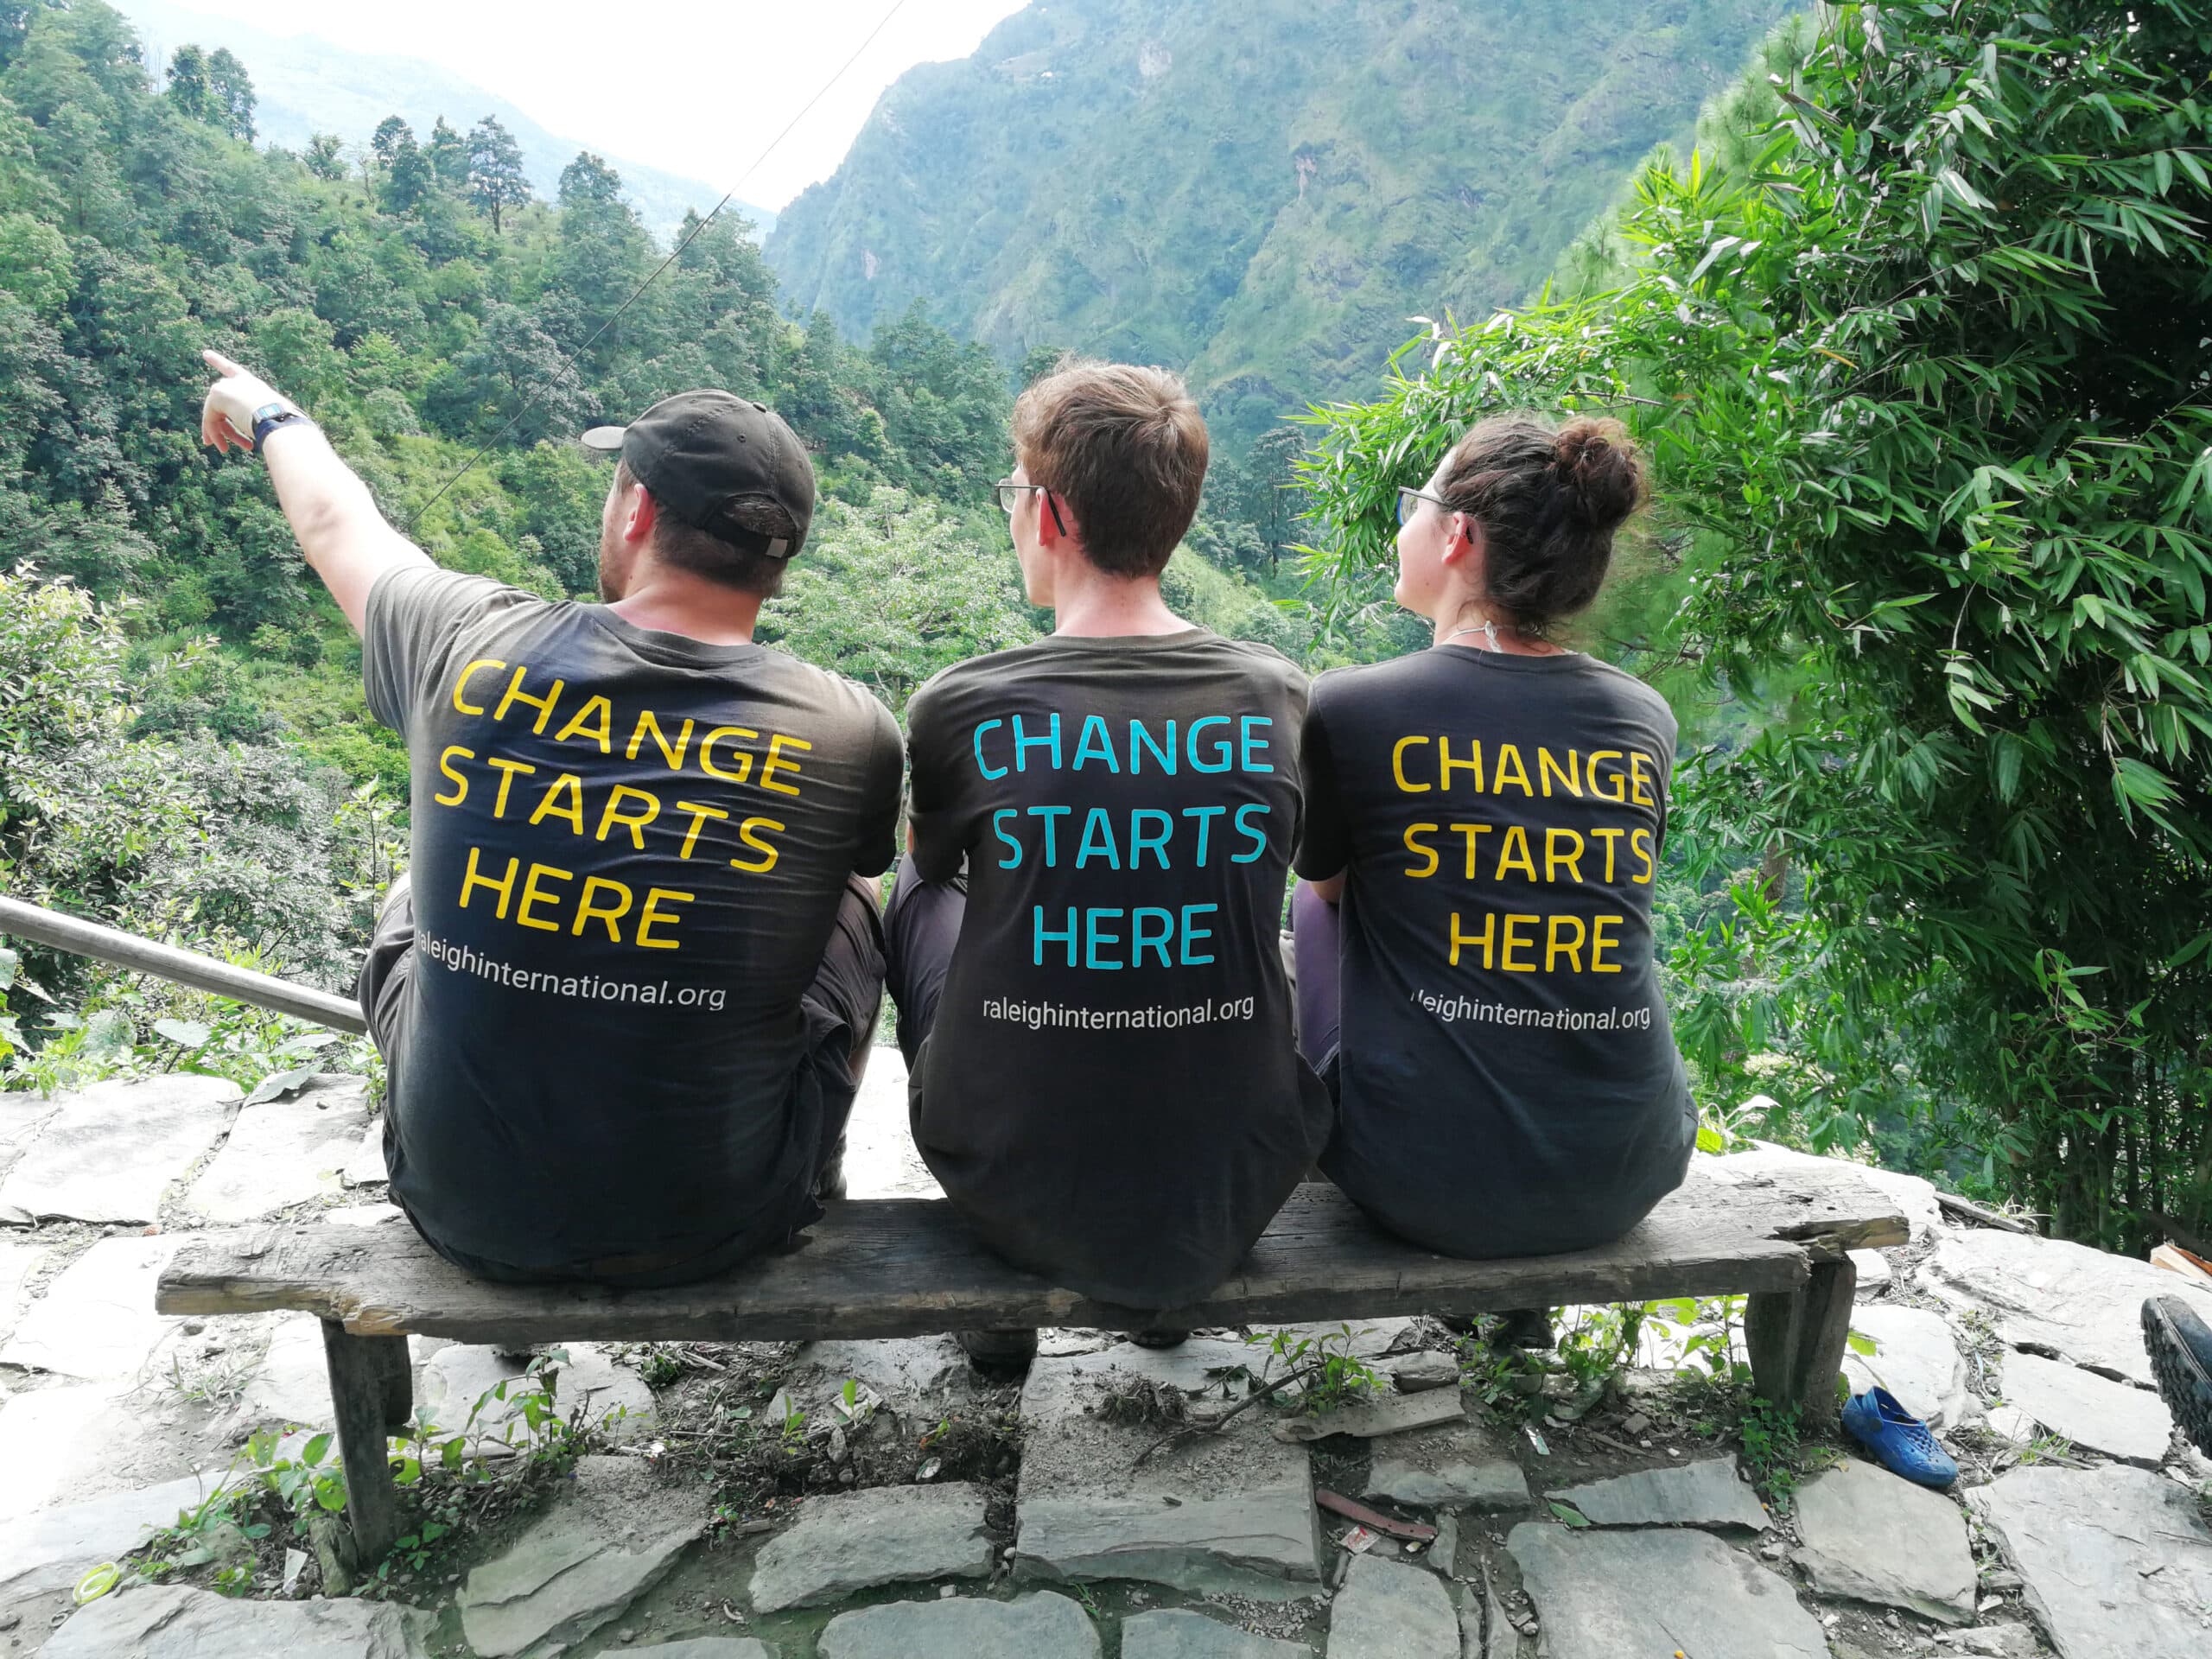 3 Raleigh International volunteers sitting with change starts here tshirts in a rainforest